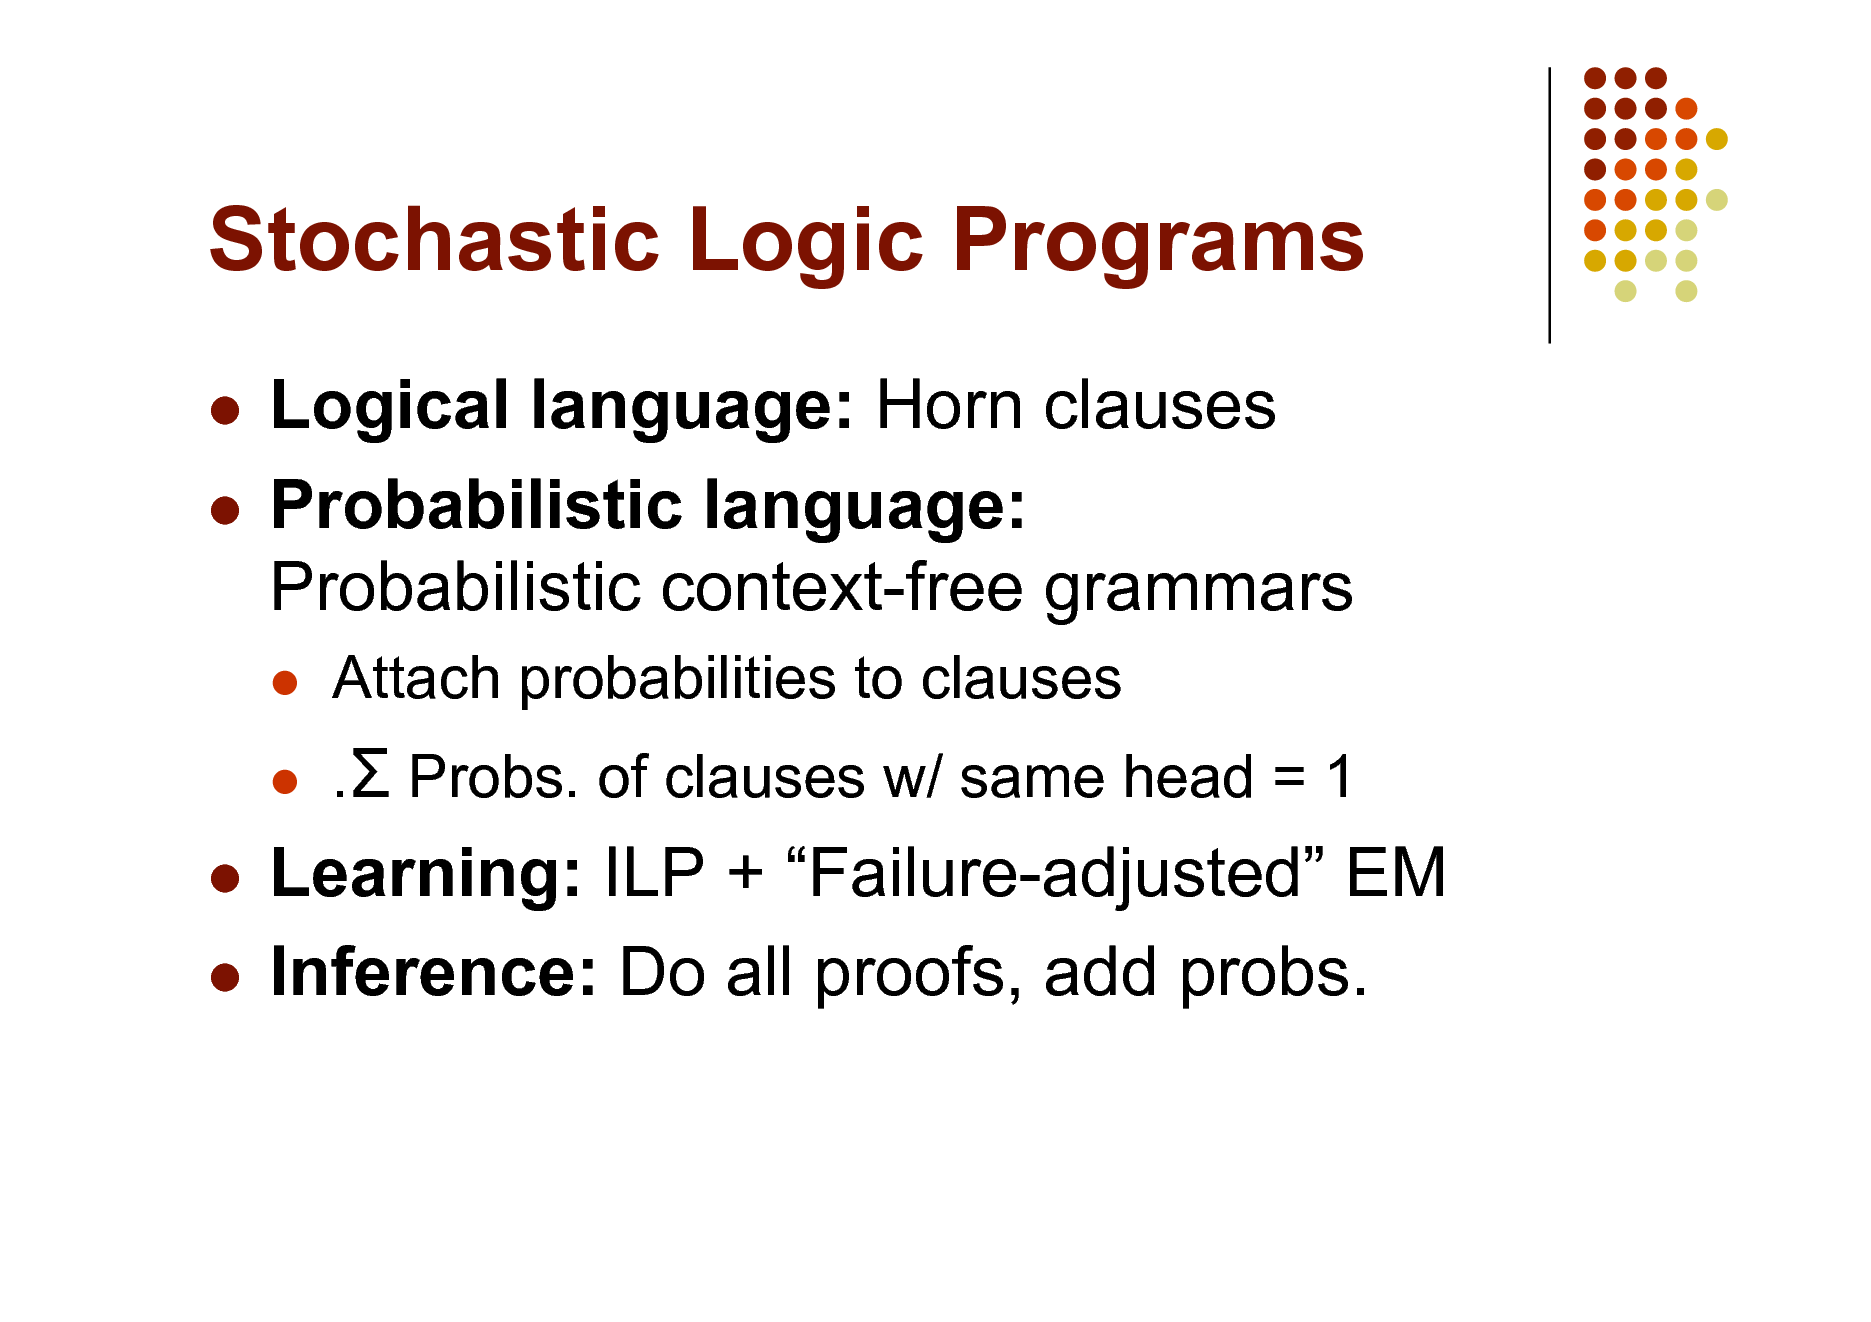 Slide: Stochastic Logic Programs
Logical language: Horn clauses  Probabilistic language: Probabilistic context-free grammars

 

Attach probabilities to clauses . Probs. of clauses w/ same head = 1

Learning: ILP + Failure-adjusted EM  Inference: Do all proofs, add probs.


